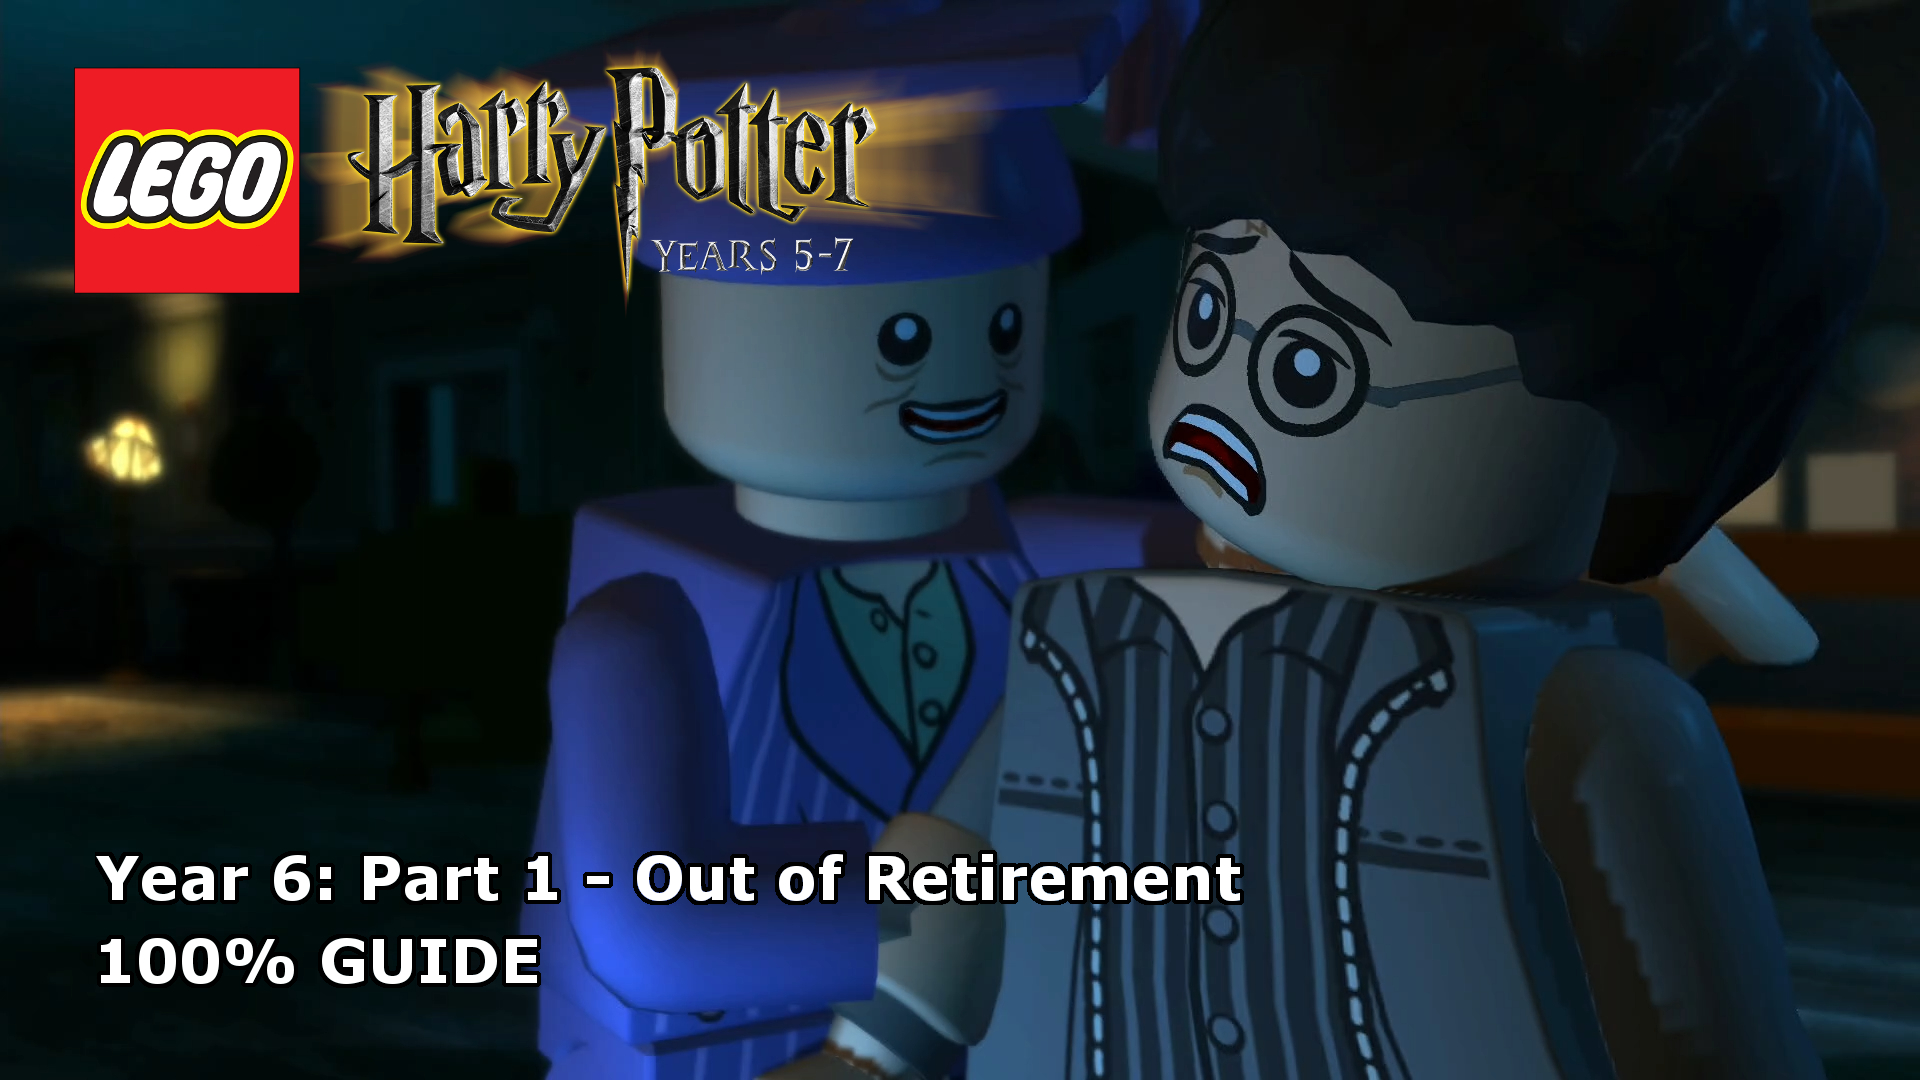 Y7 P1 L1: The Seven Harrys - LEGO Harry Potter: Years 5-7 Guide and  Walkthrough